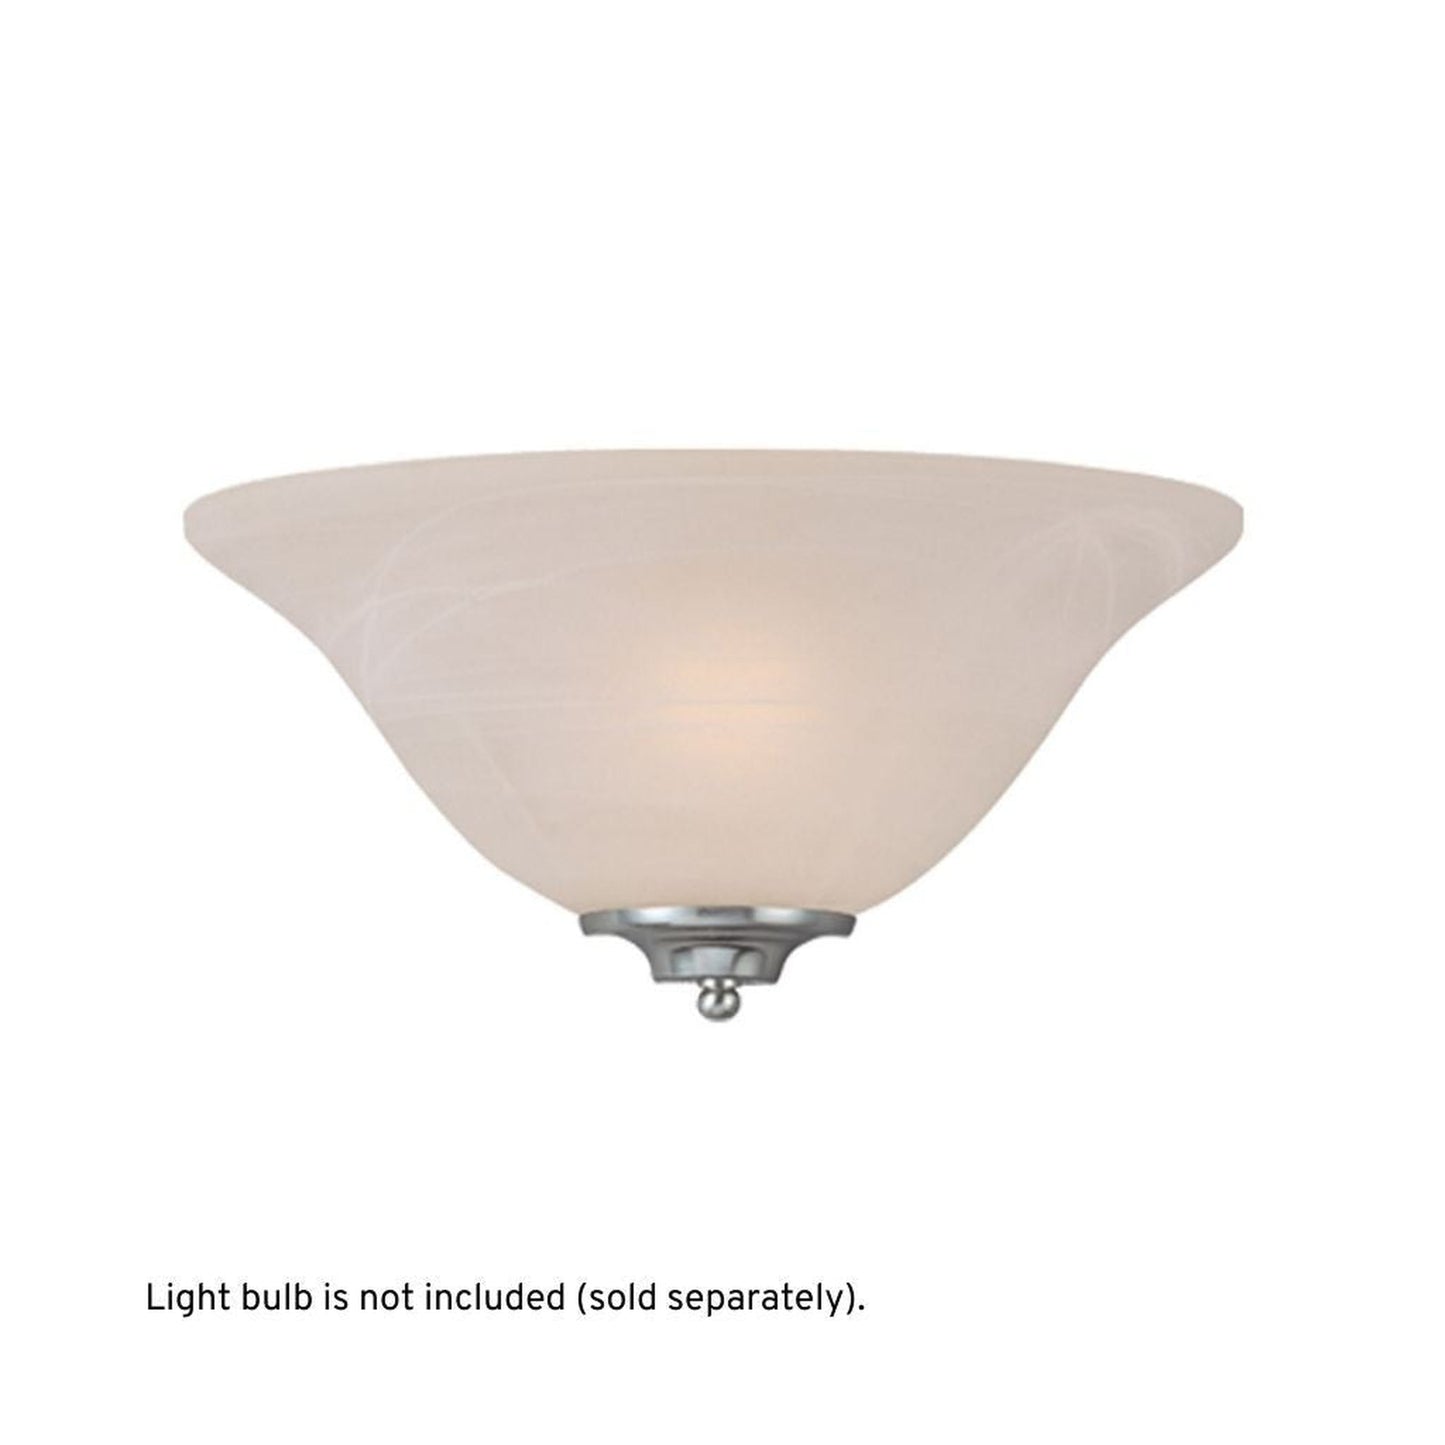 Craftmade Raleigh 7" x 13" 1-Light Satin Nickel Wall Sconce With Bowl Faux Alabaster Glass Shade